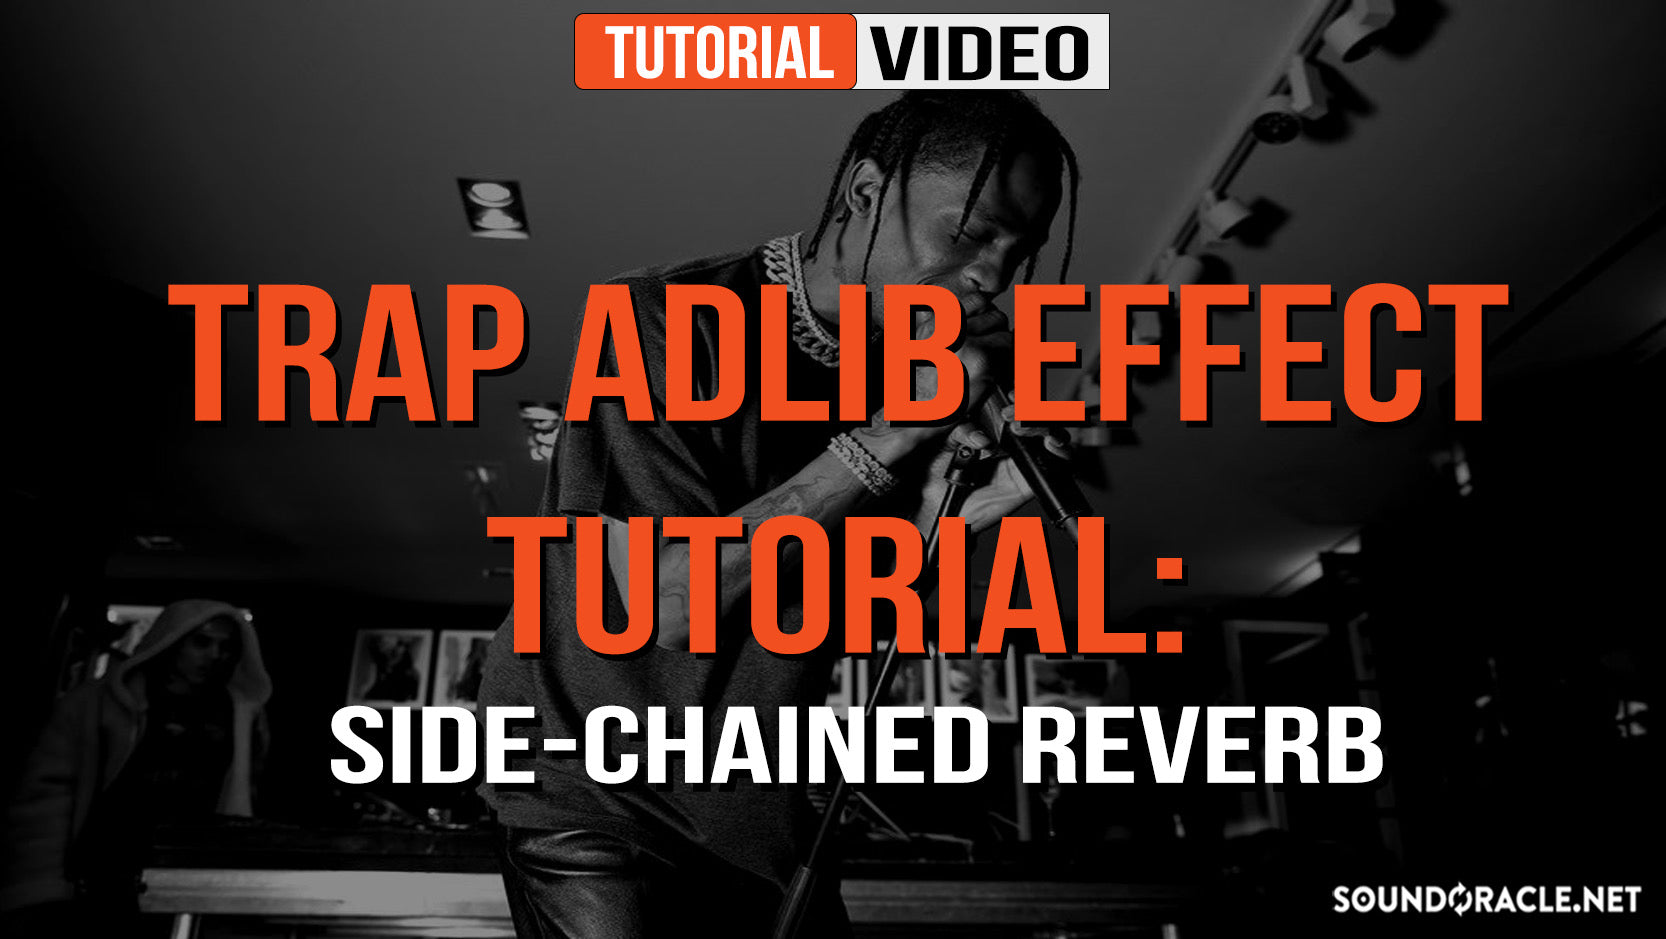 Trap Adlib Effect Tutorial: Side-Chained Reverb